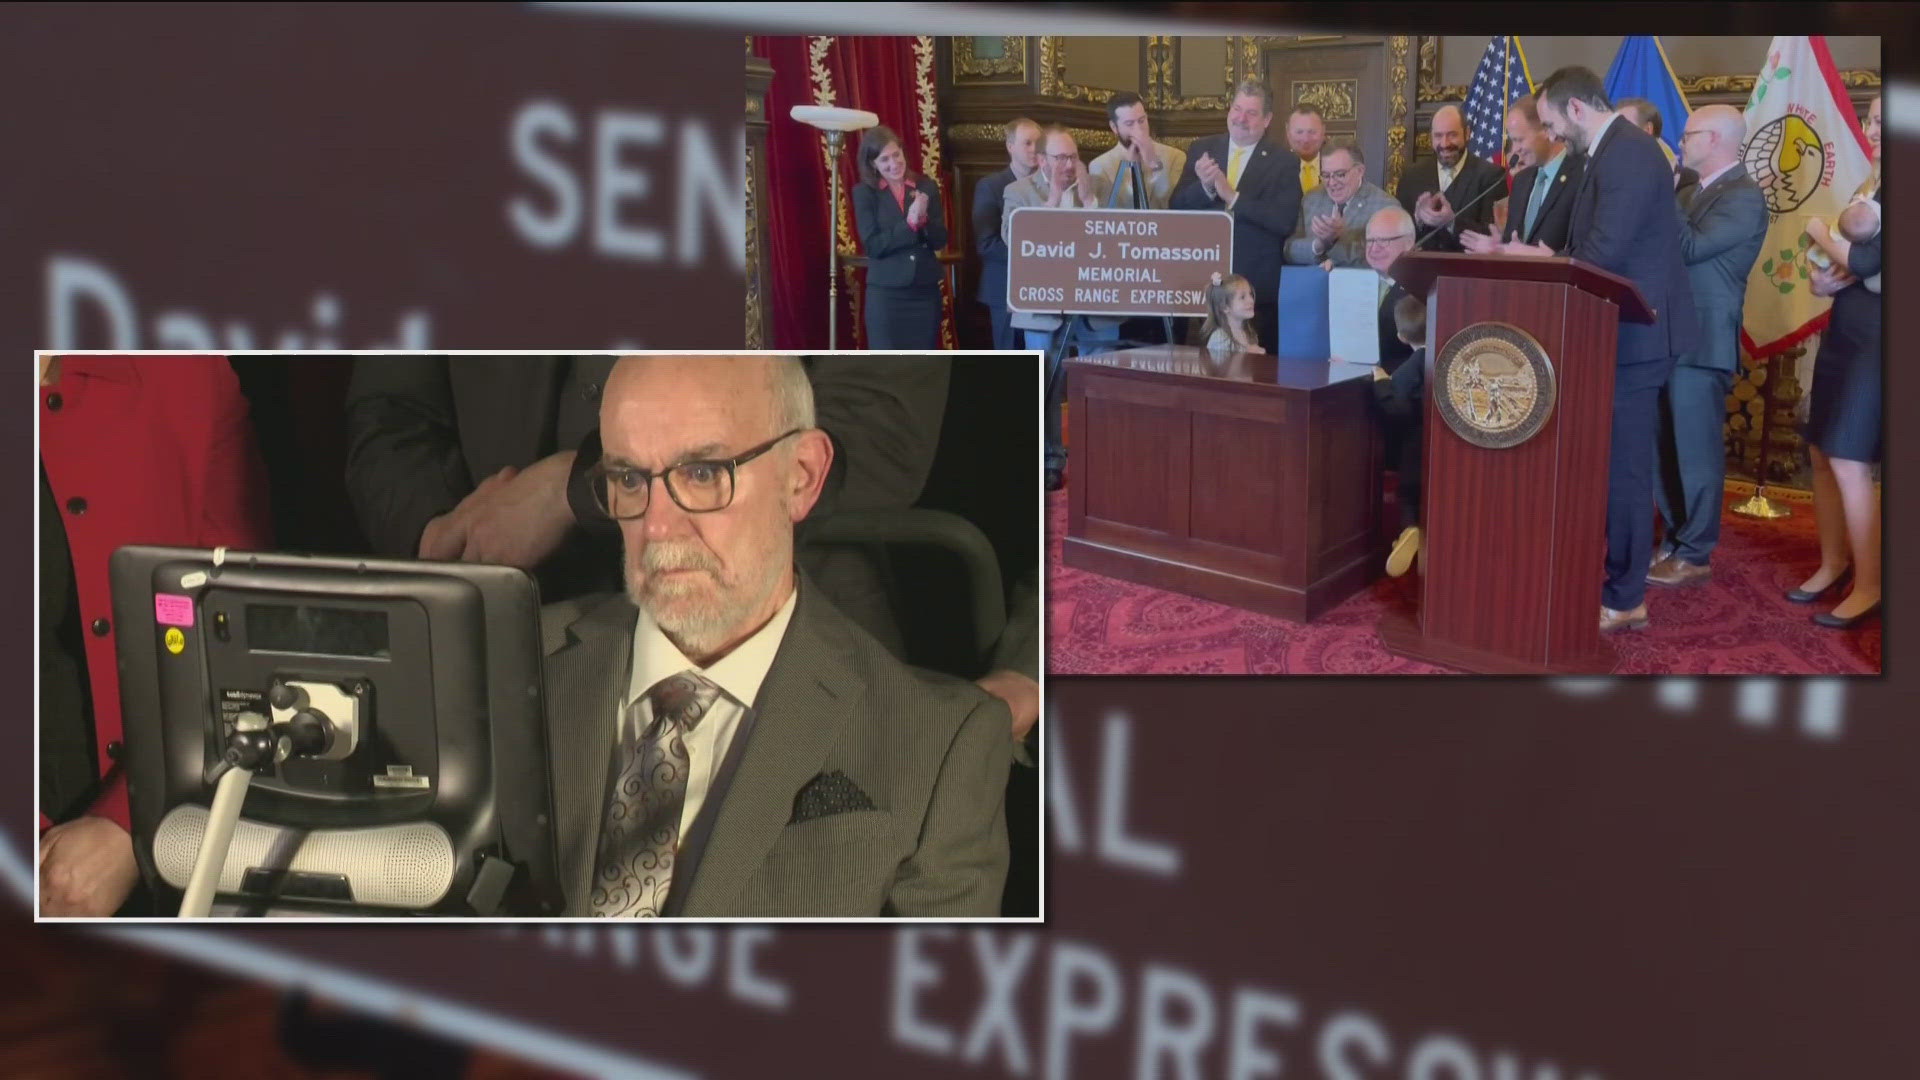 Tomassoni spent 30 years in the legislature and was diagnosed with ALS in 2021.